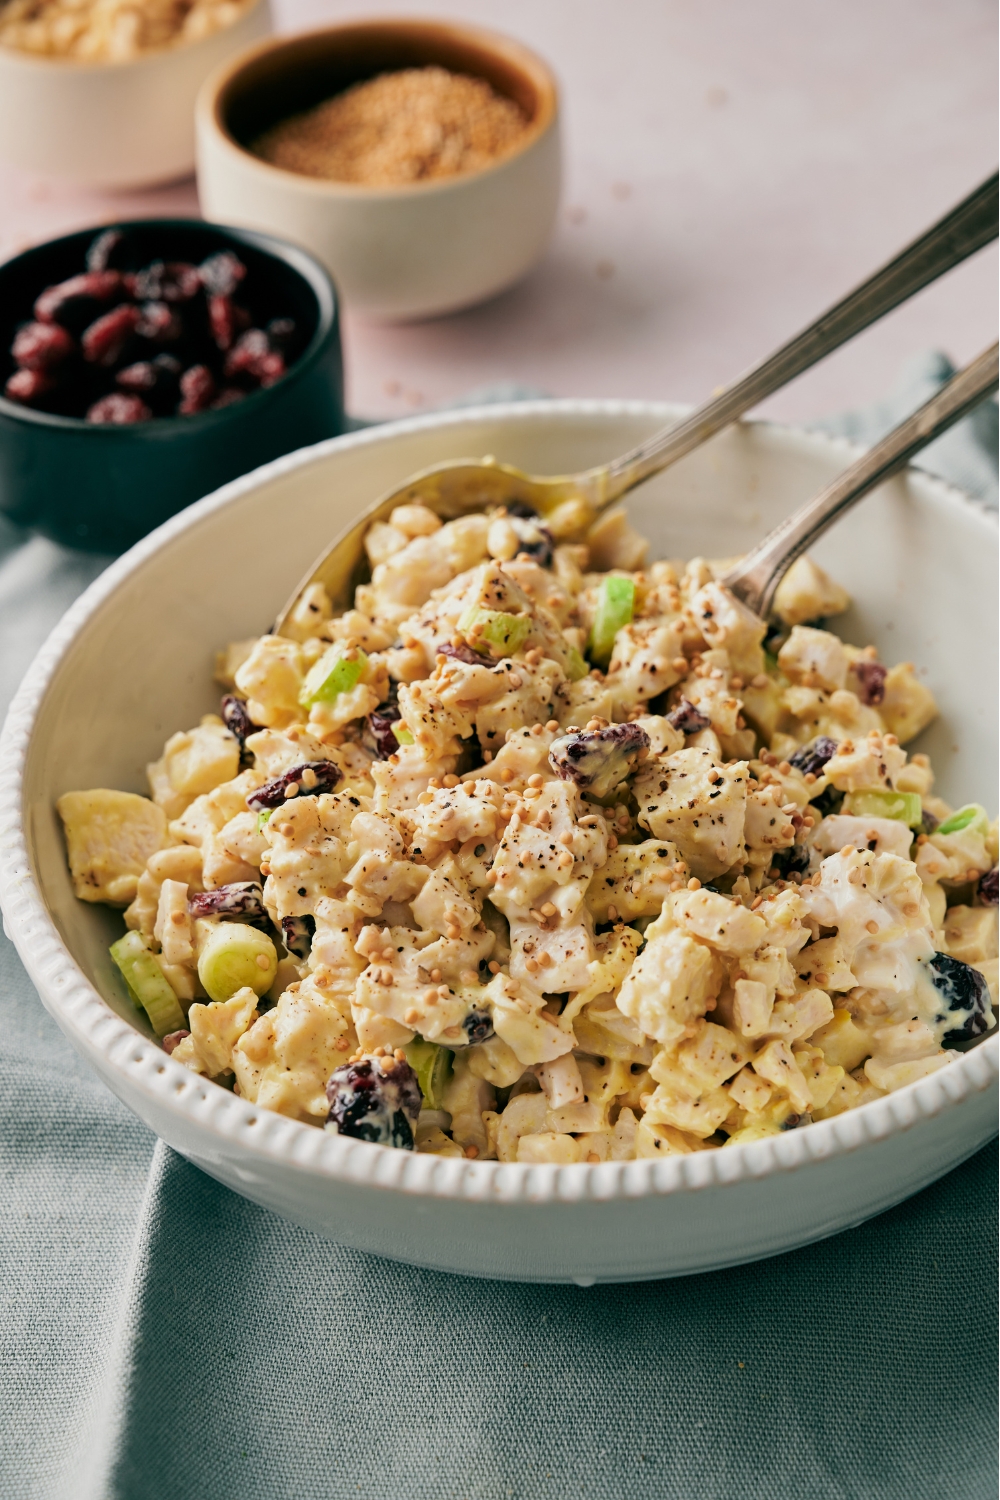 A bowl of chicken salad with diced celery, dried cranberries, and a mustard dressing with black pepper on top. There are two spoons in the bowl.